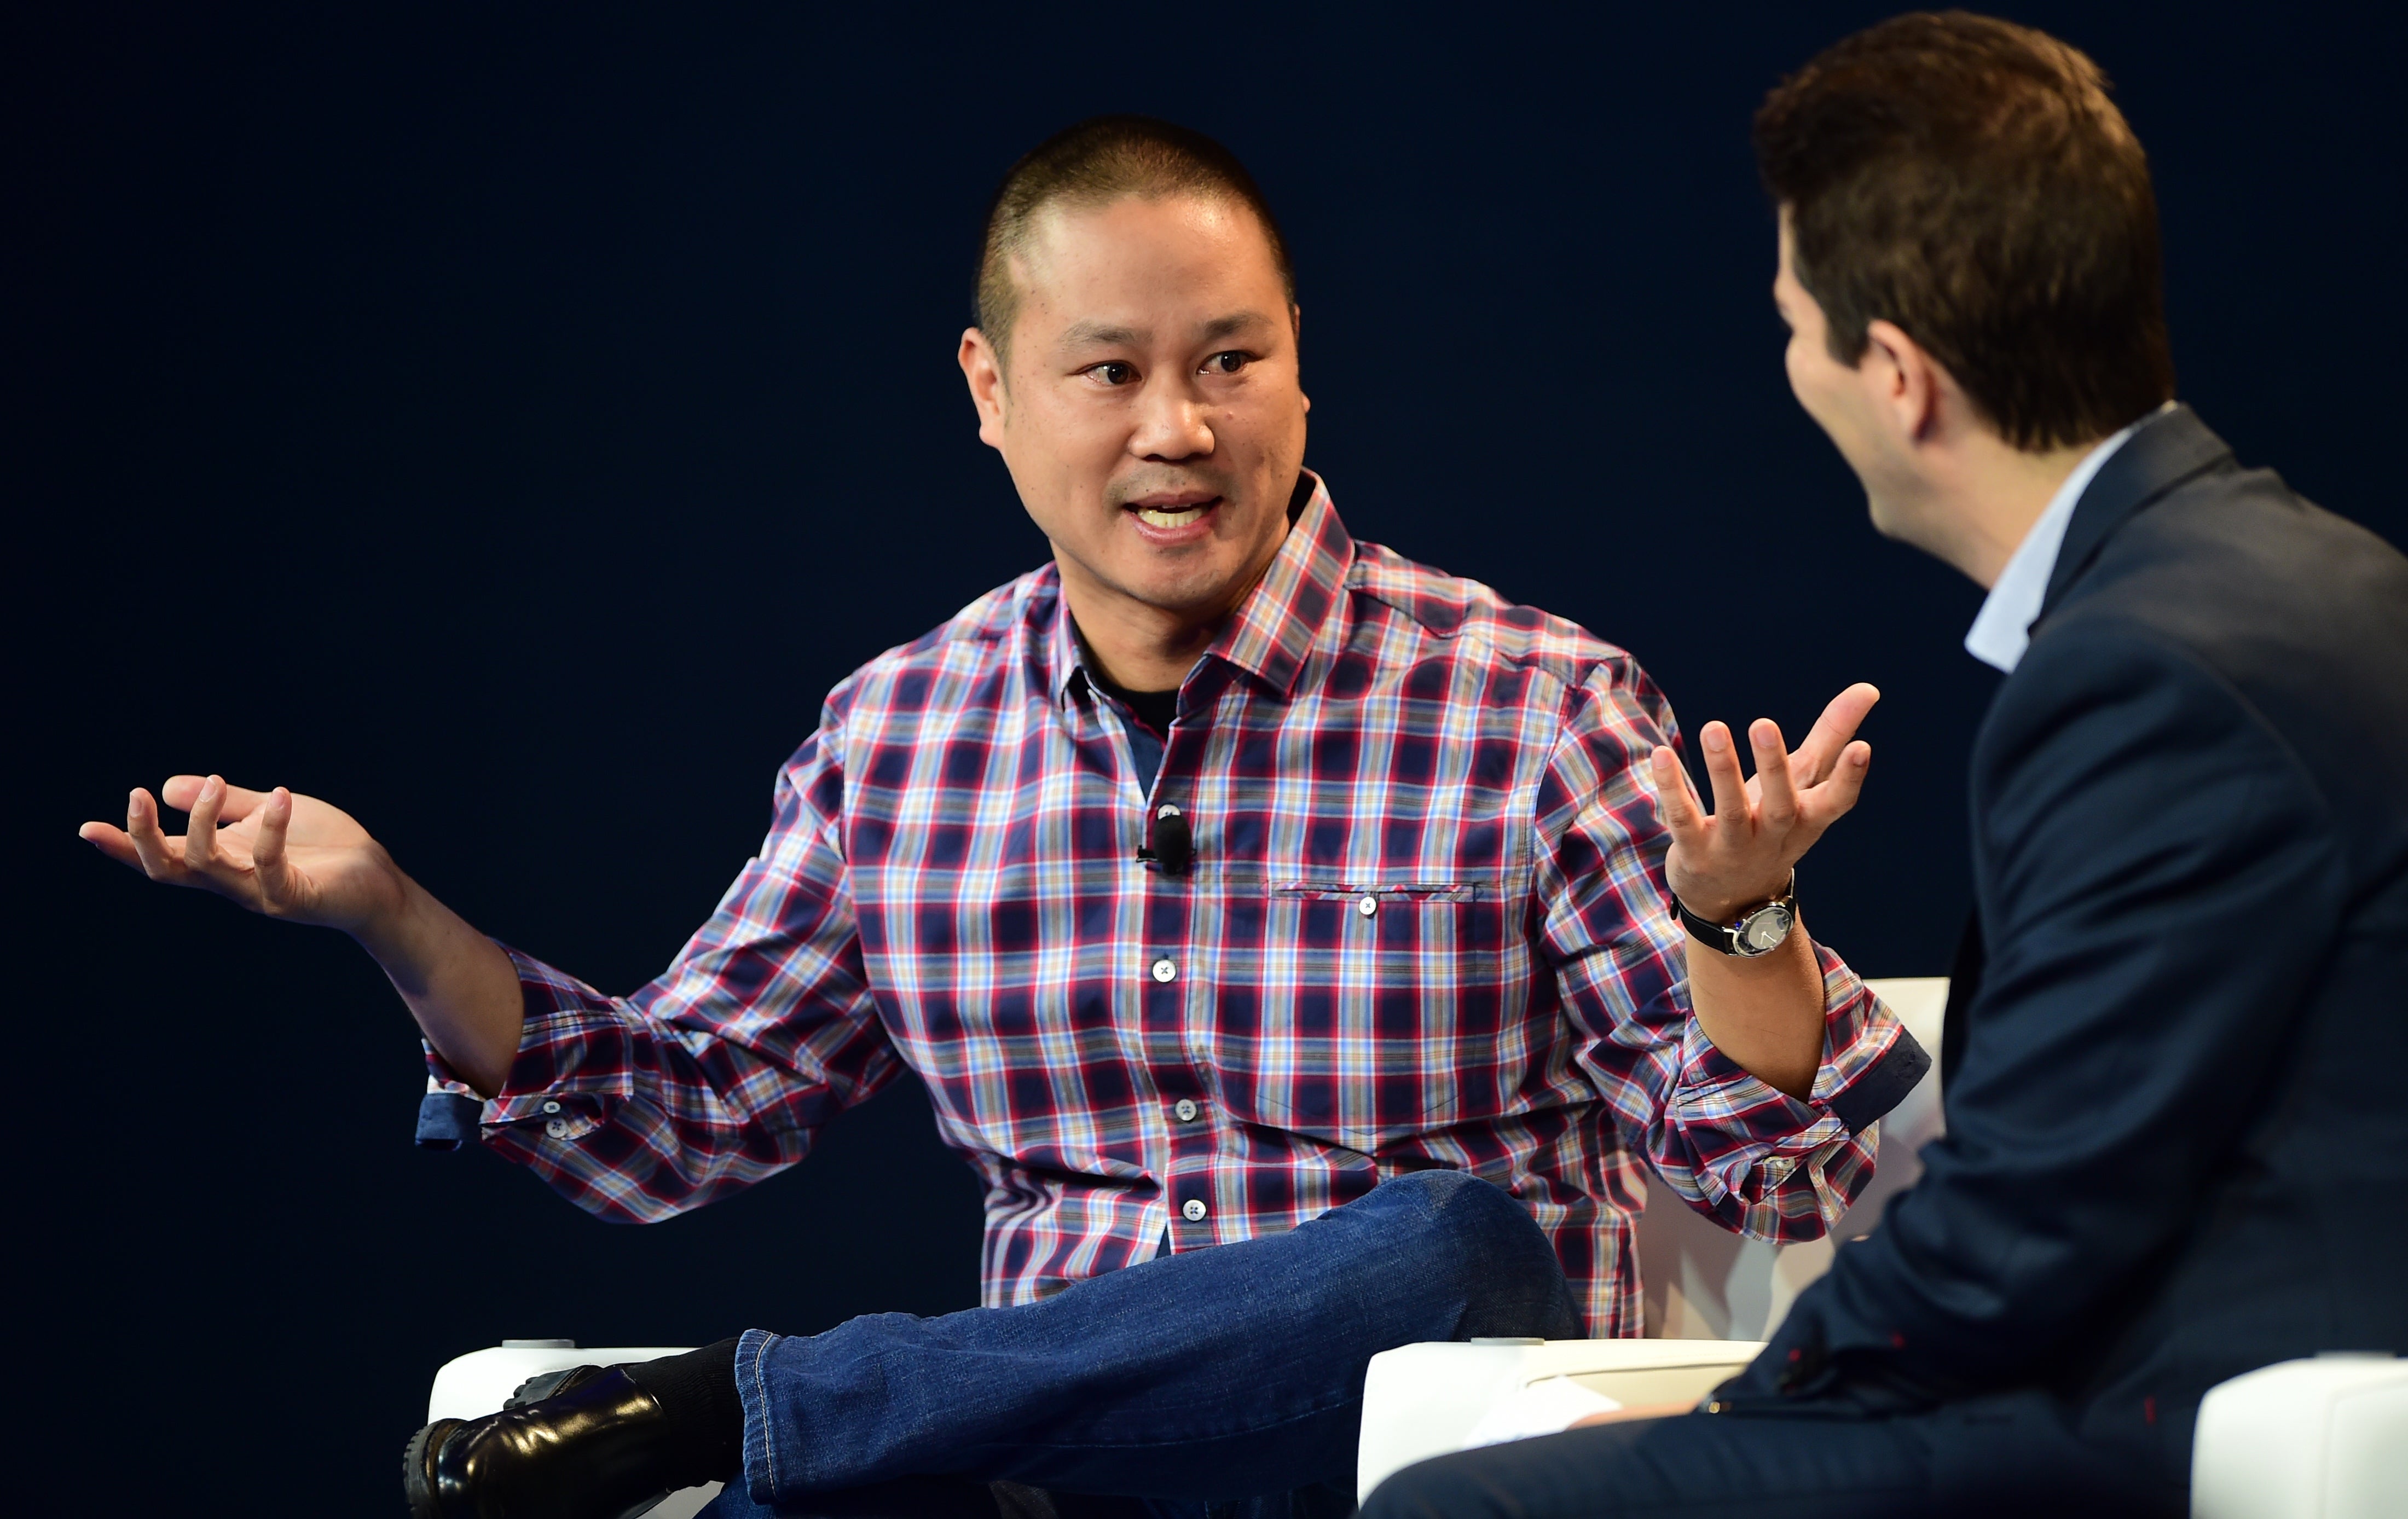 Tony Hsieh, CEO of Zappos, responds to questions from interviewer Dennis Berman at 2015 WSJD Live on October 20, 2015 in Laguna Beach, California.